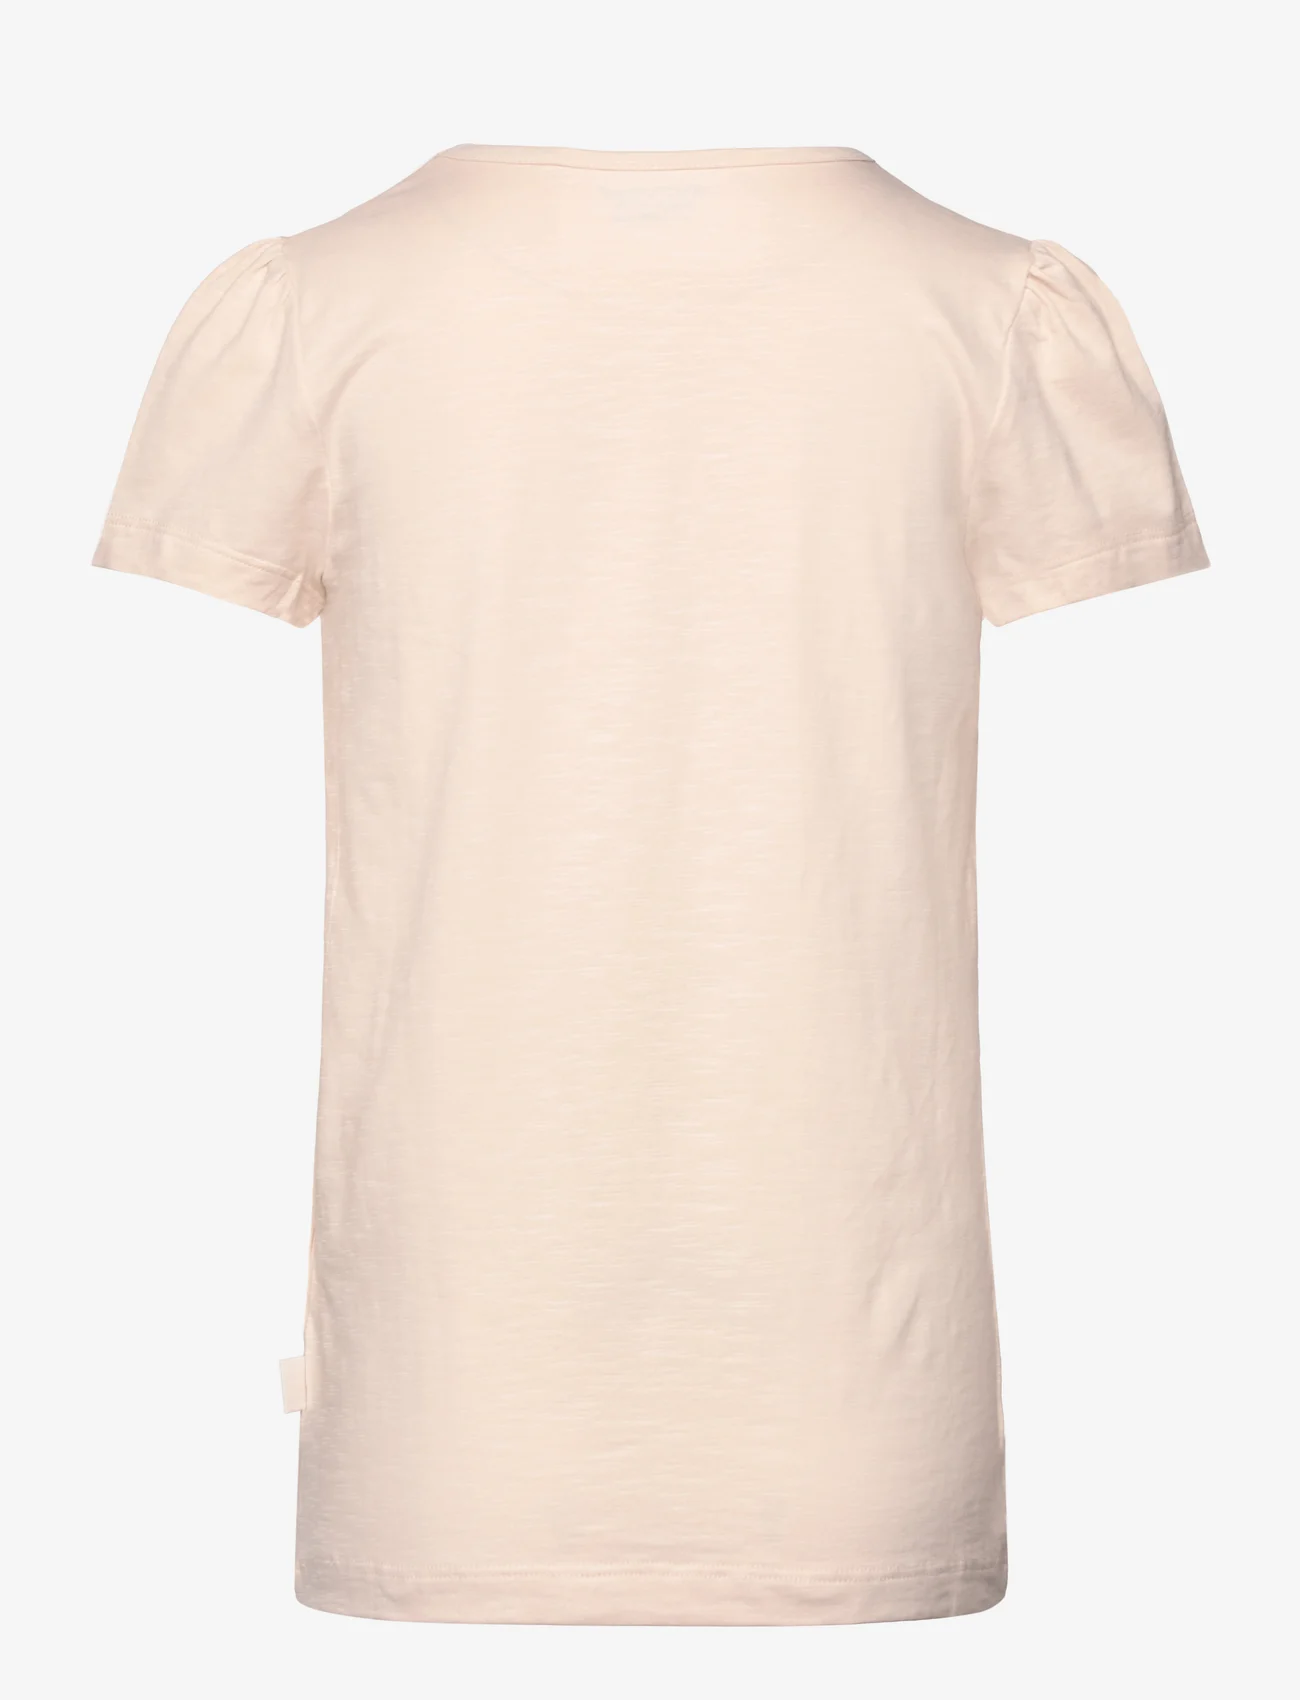 Minymo - T-shirt SS - short-sleeved - pink champagne - 1